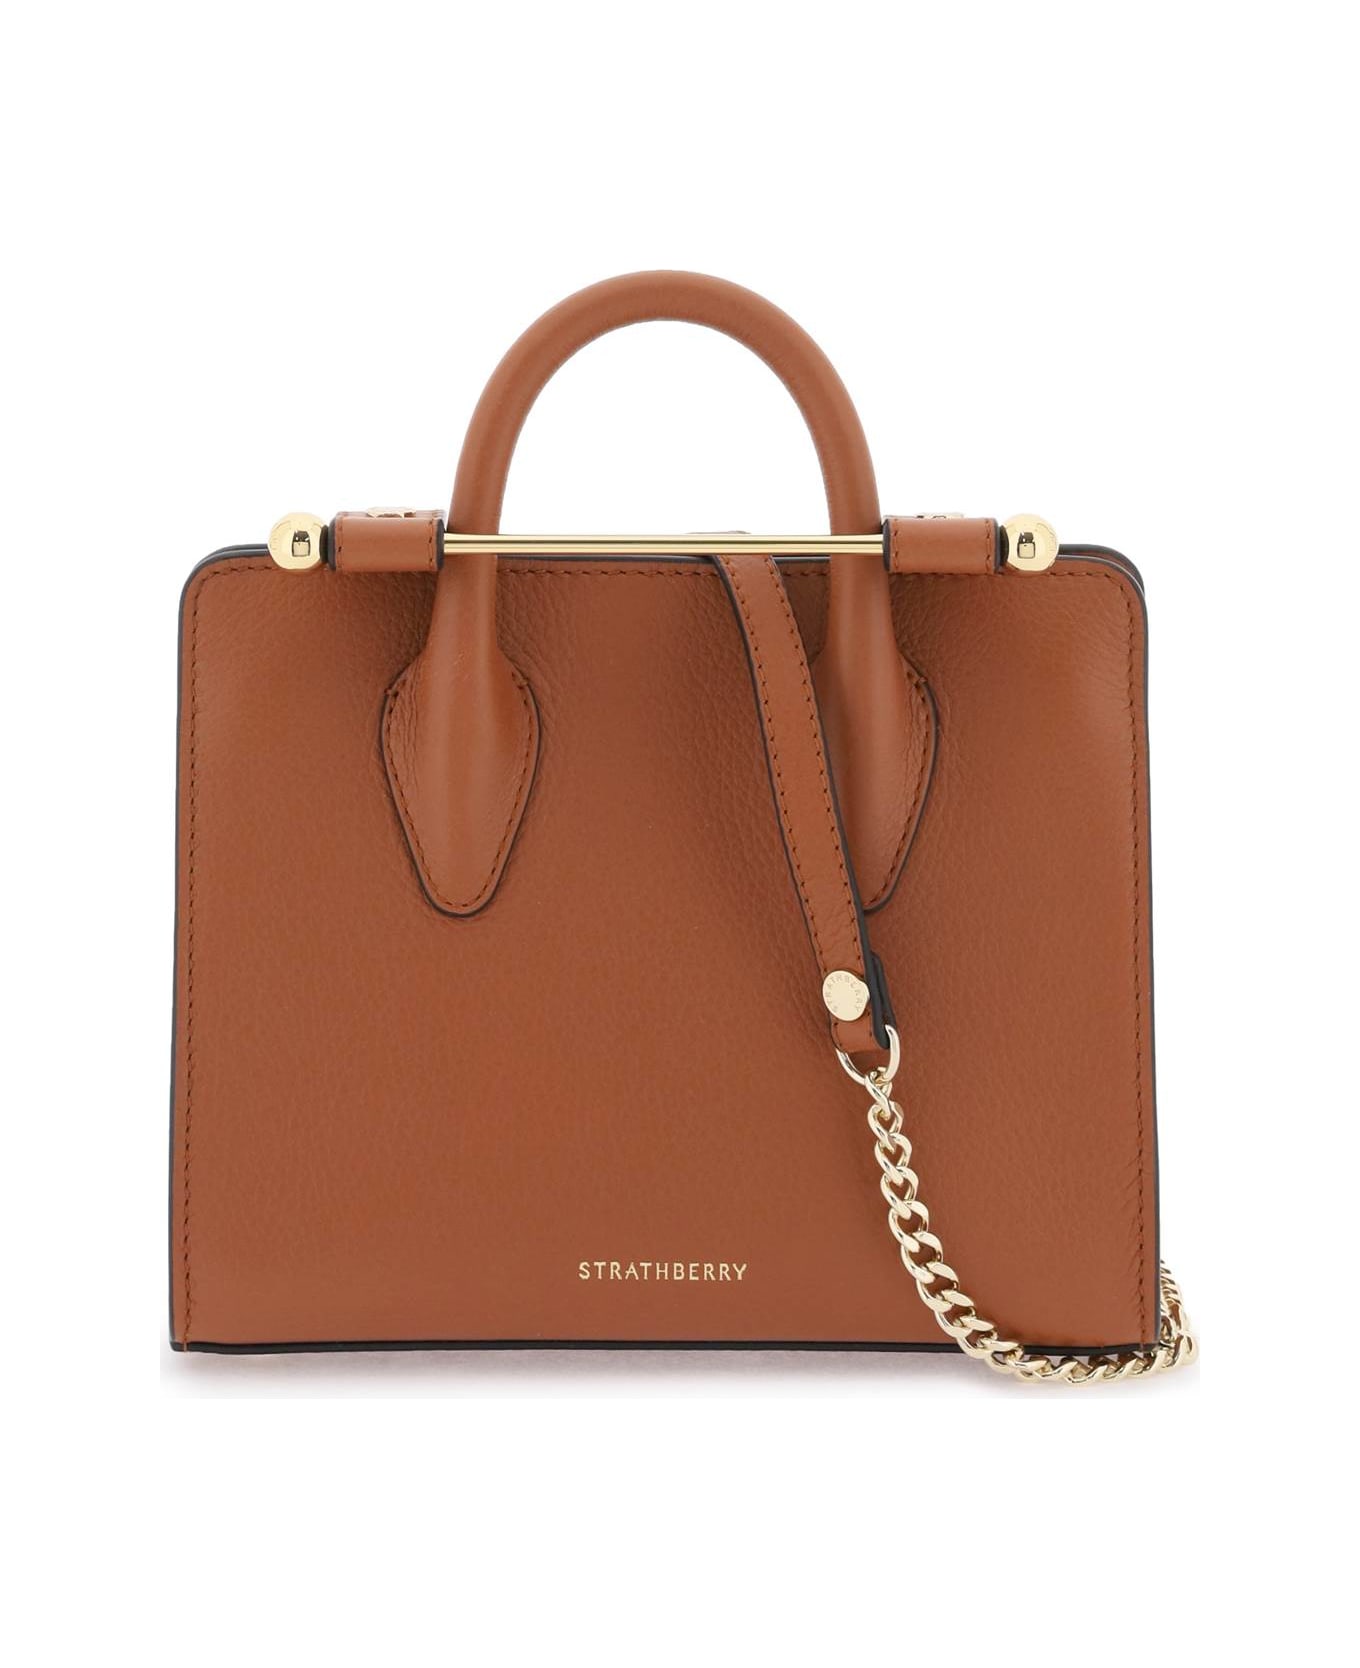 Strathberry Nano Tote Leather Bag - CHESTNUT (Brown) トートバッグ